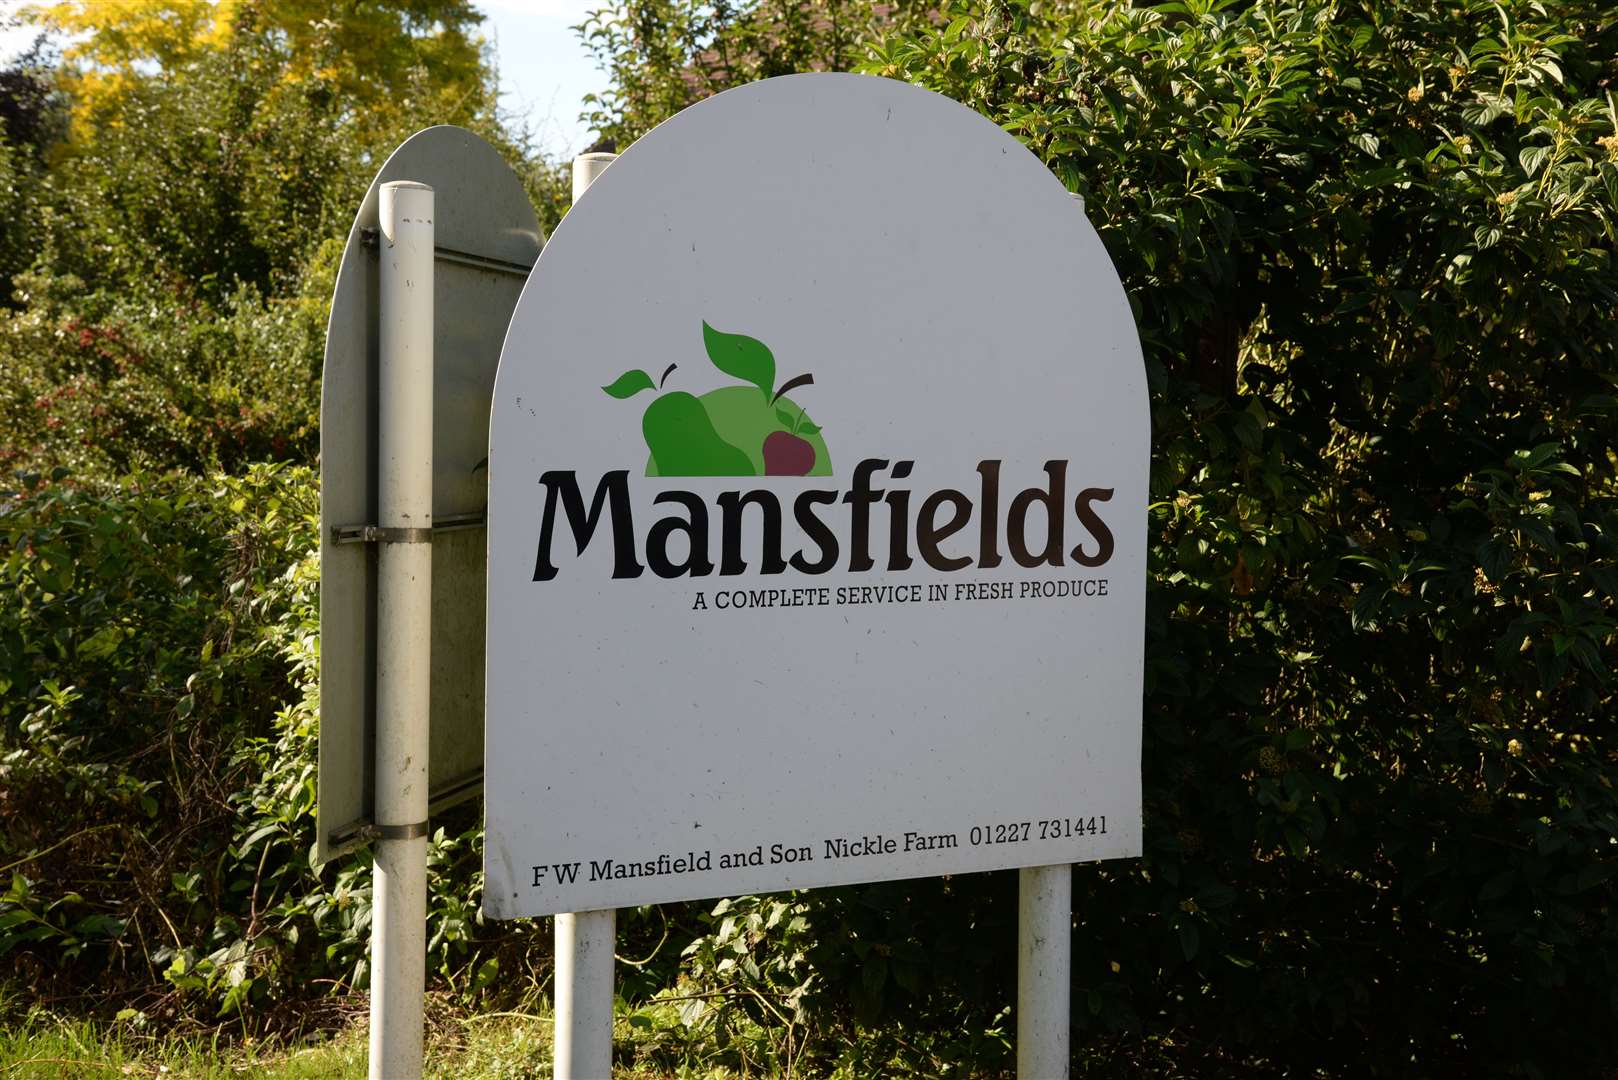 Mansfields has a number of bases across Kent